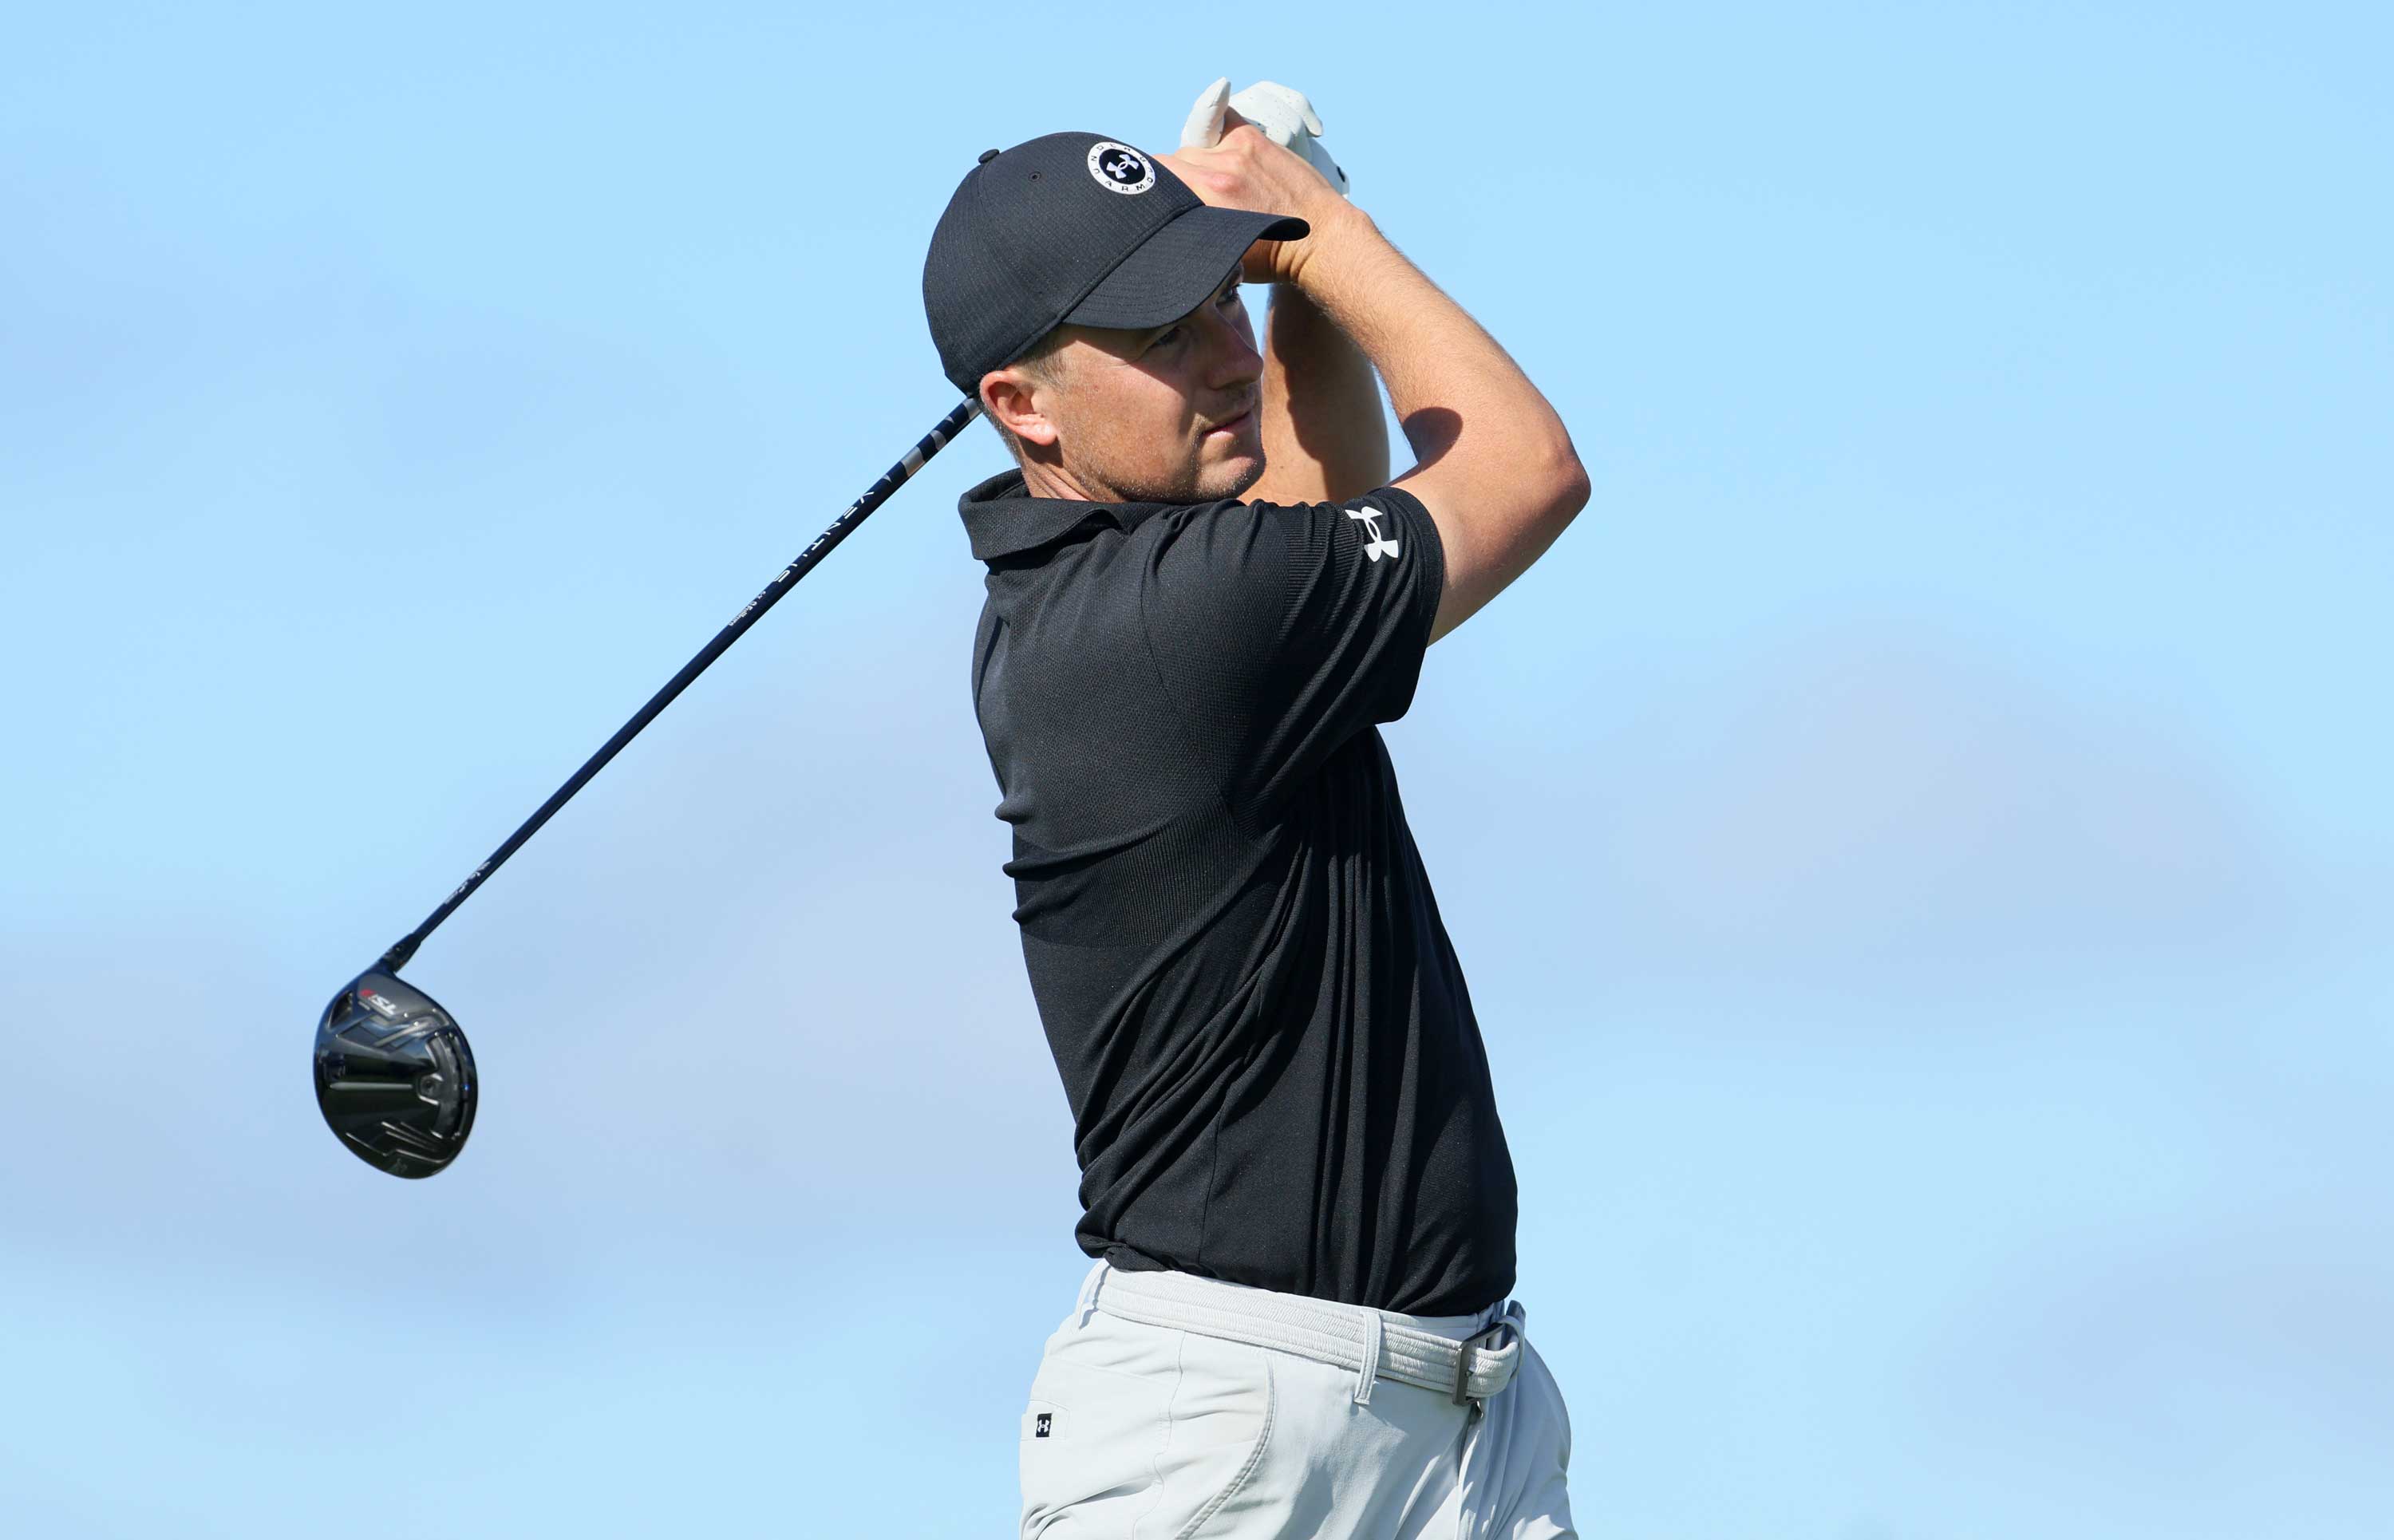 Jordan Spieth in contention at Kapalua after cracking his driver in pro-am  | Golf News and Tour Information | GolfDigest.com